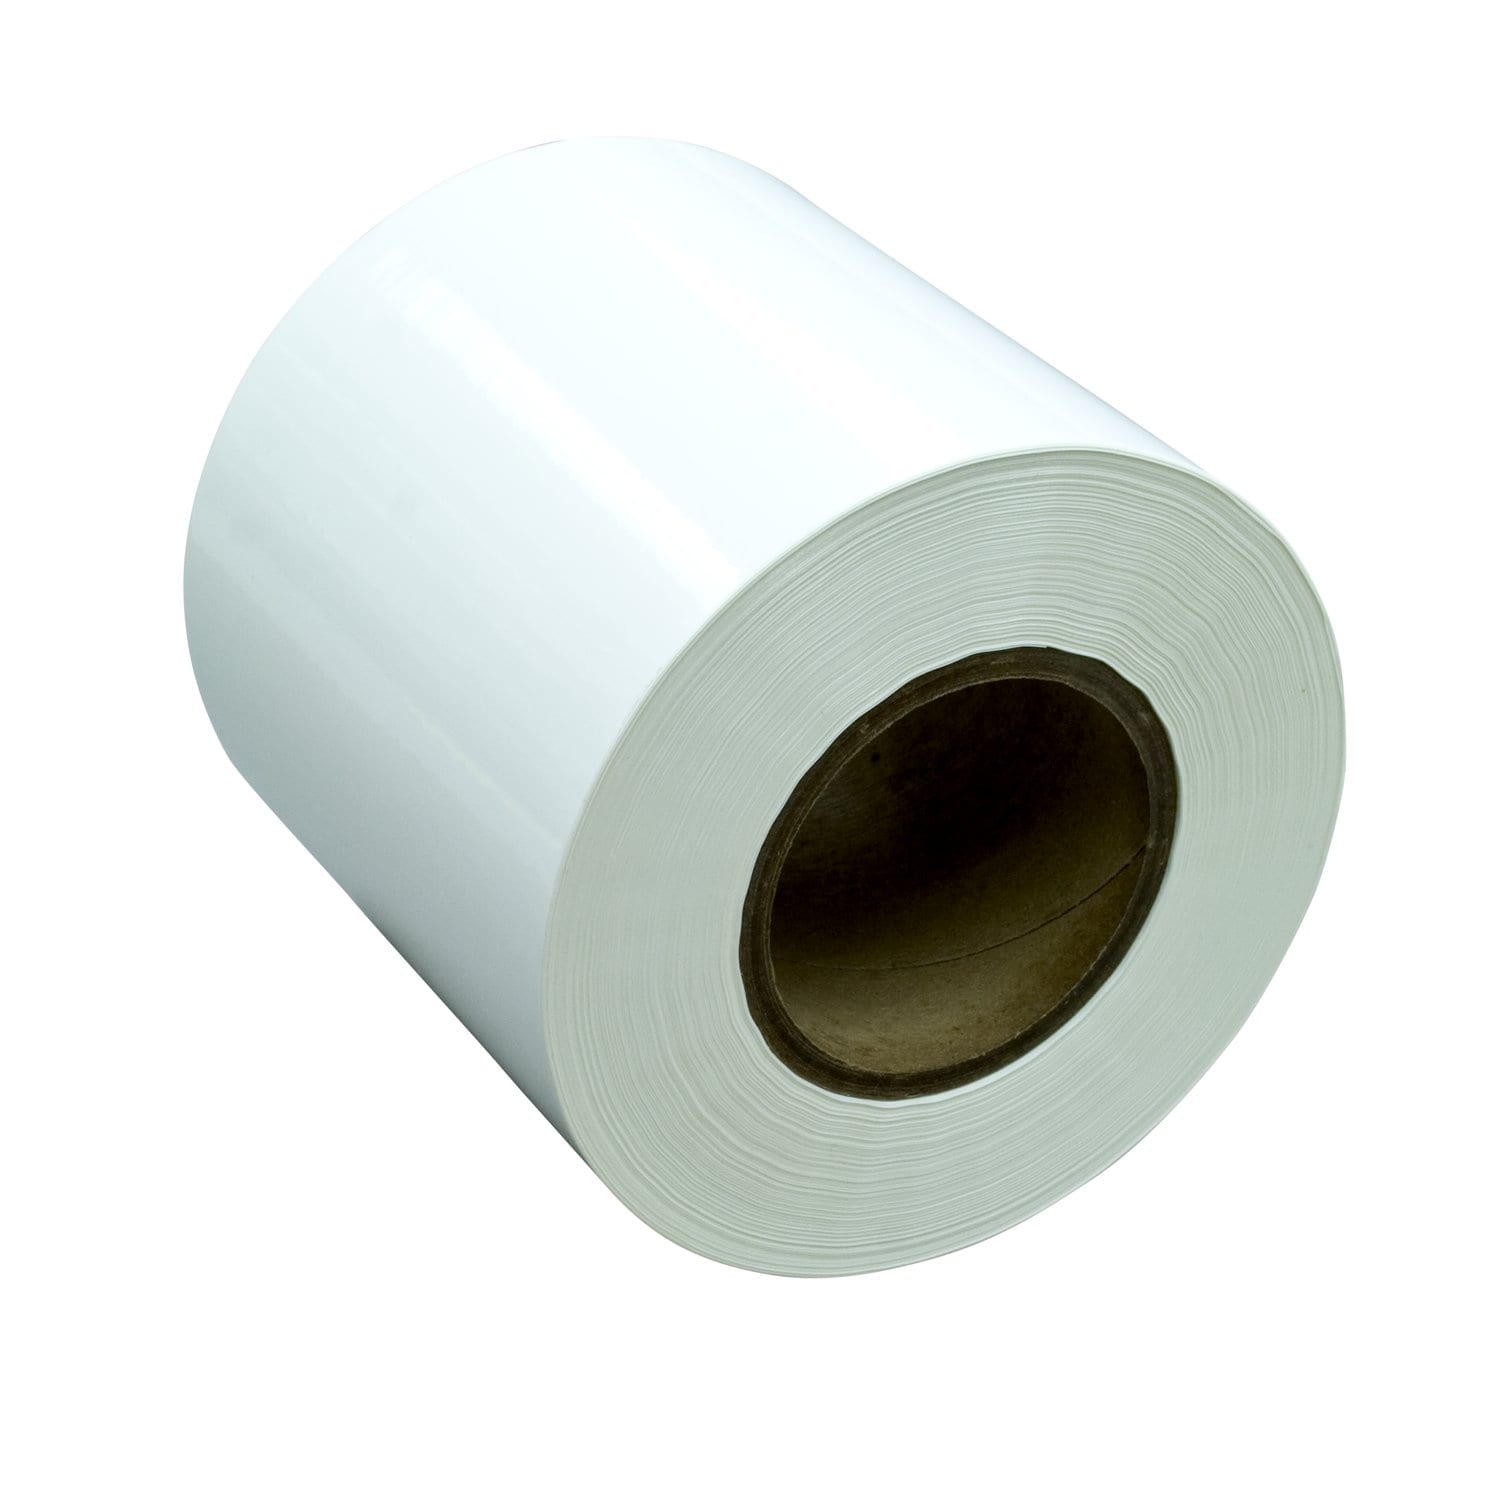 7100133109 - 3M Thermal Transfer Label Material 7816 Precision, White Polyester
Gloss, Roll, Config